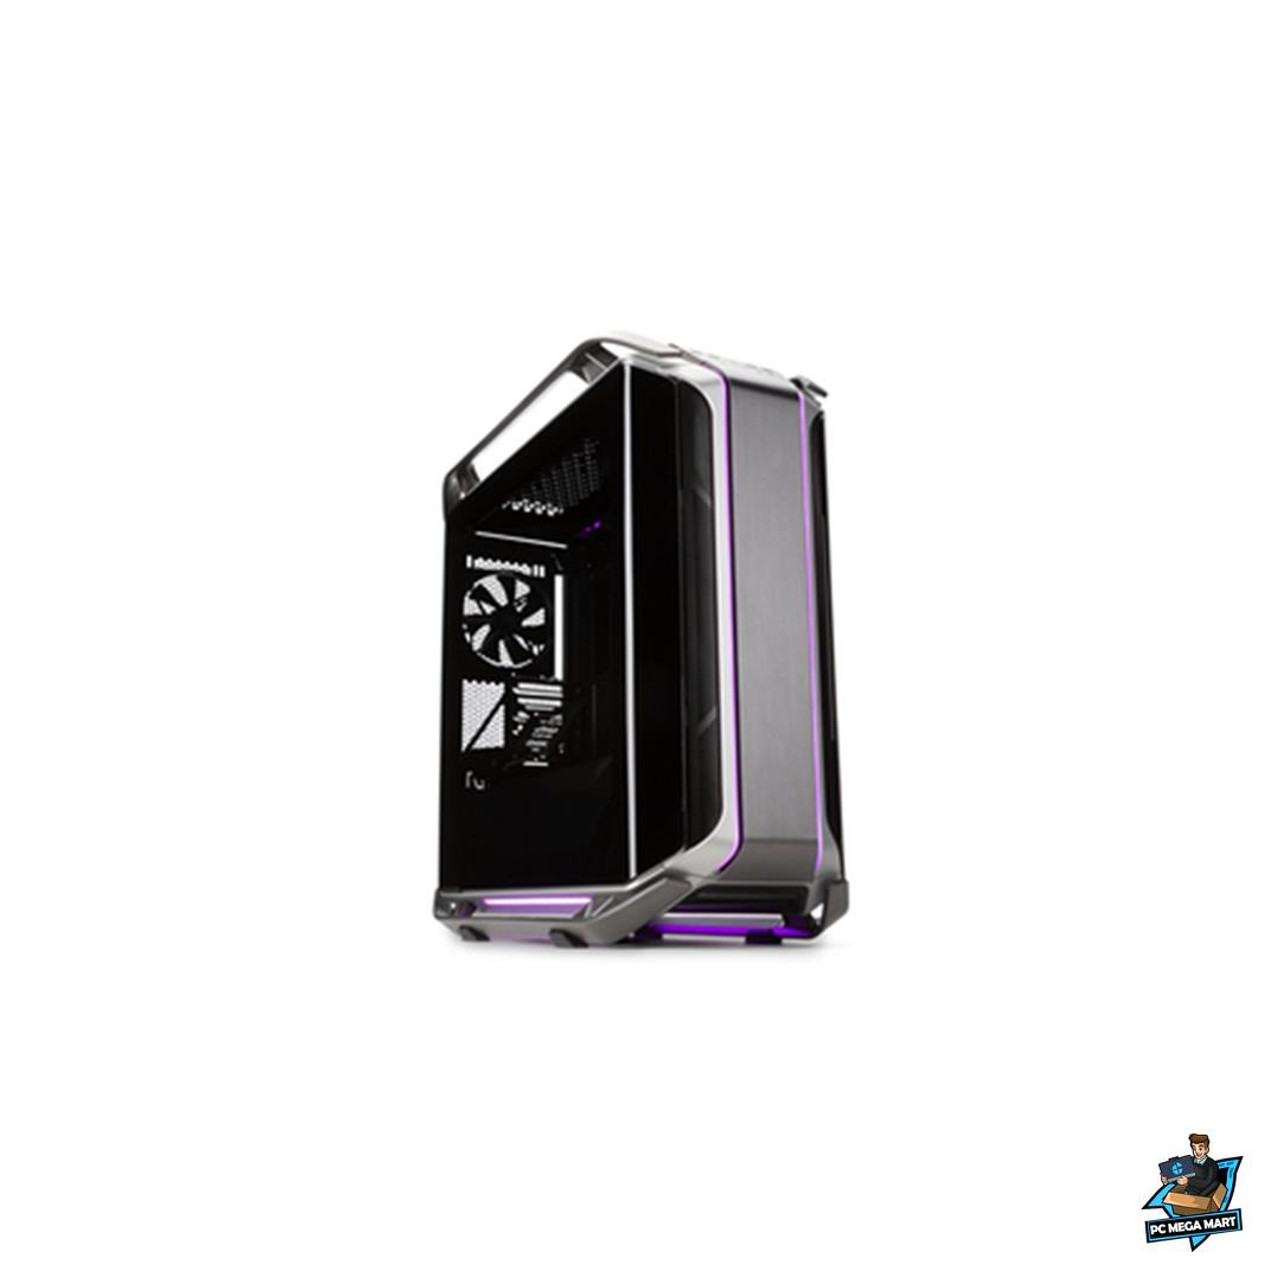 Temp Images\Cooler Master Cosmos C700M Full-Tower Black,Grey,Silver 0